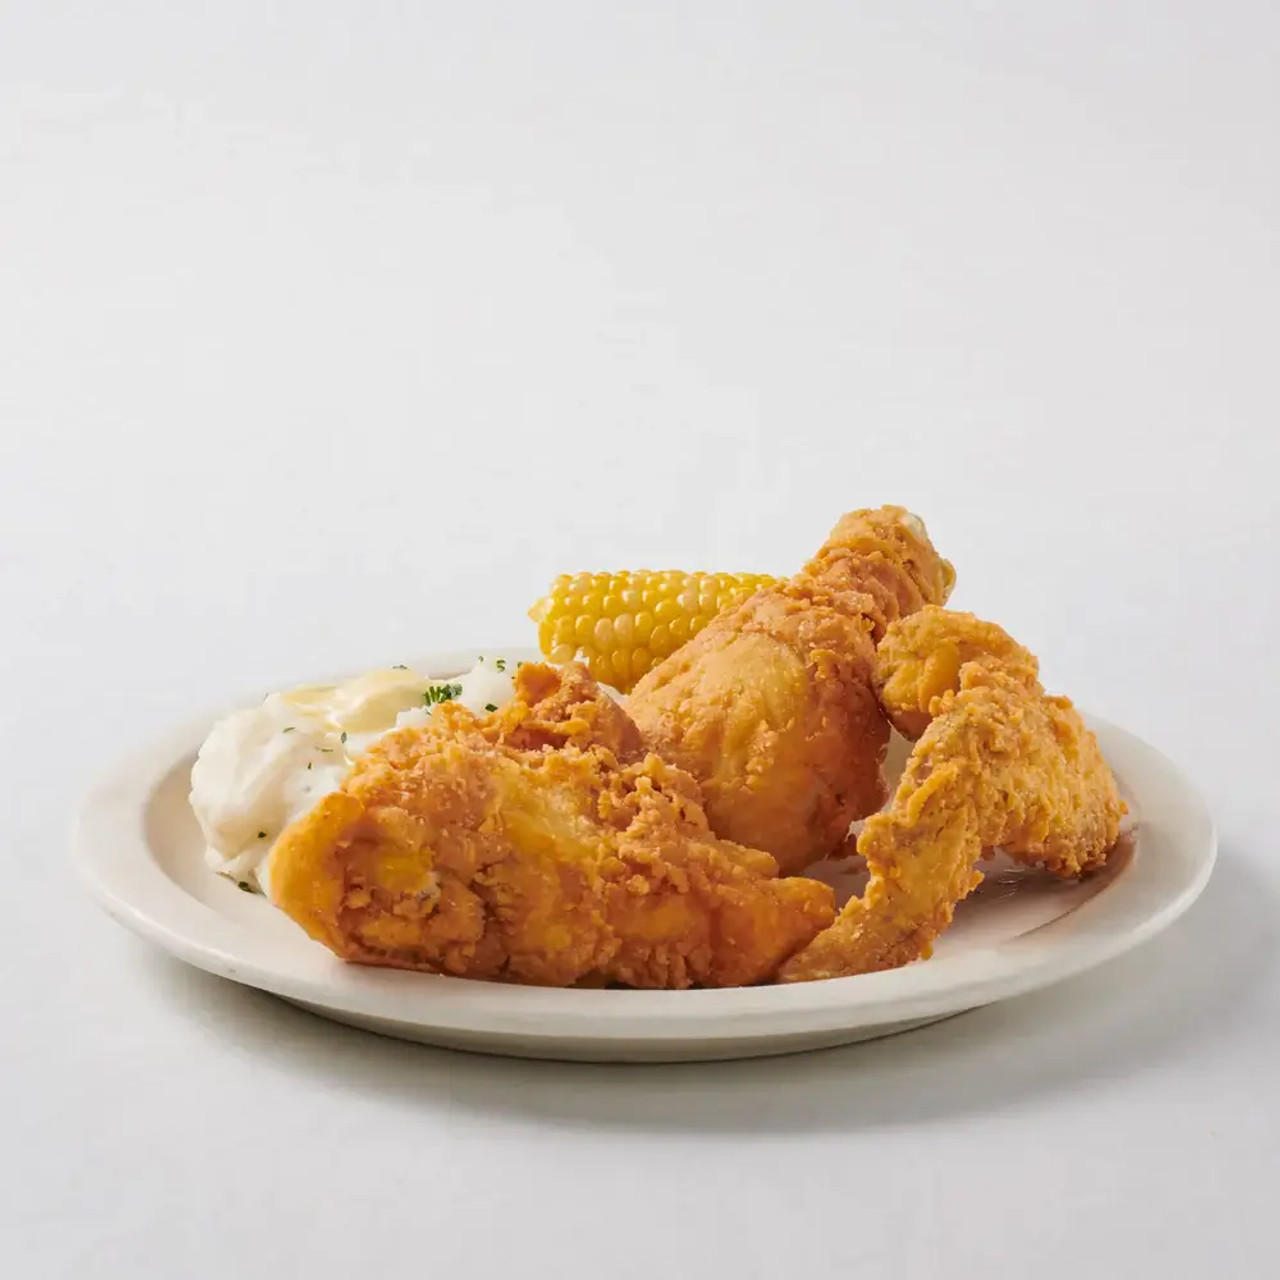 Golden Dipt 50 lbs. /22.68 kg Chicken Fry Mix - Perfect Blend for Southern-Chicken Pieces